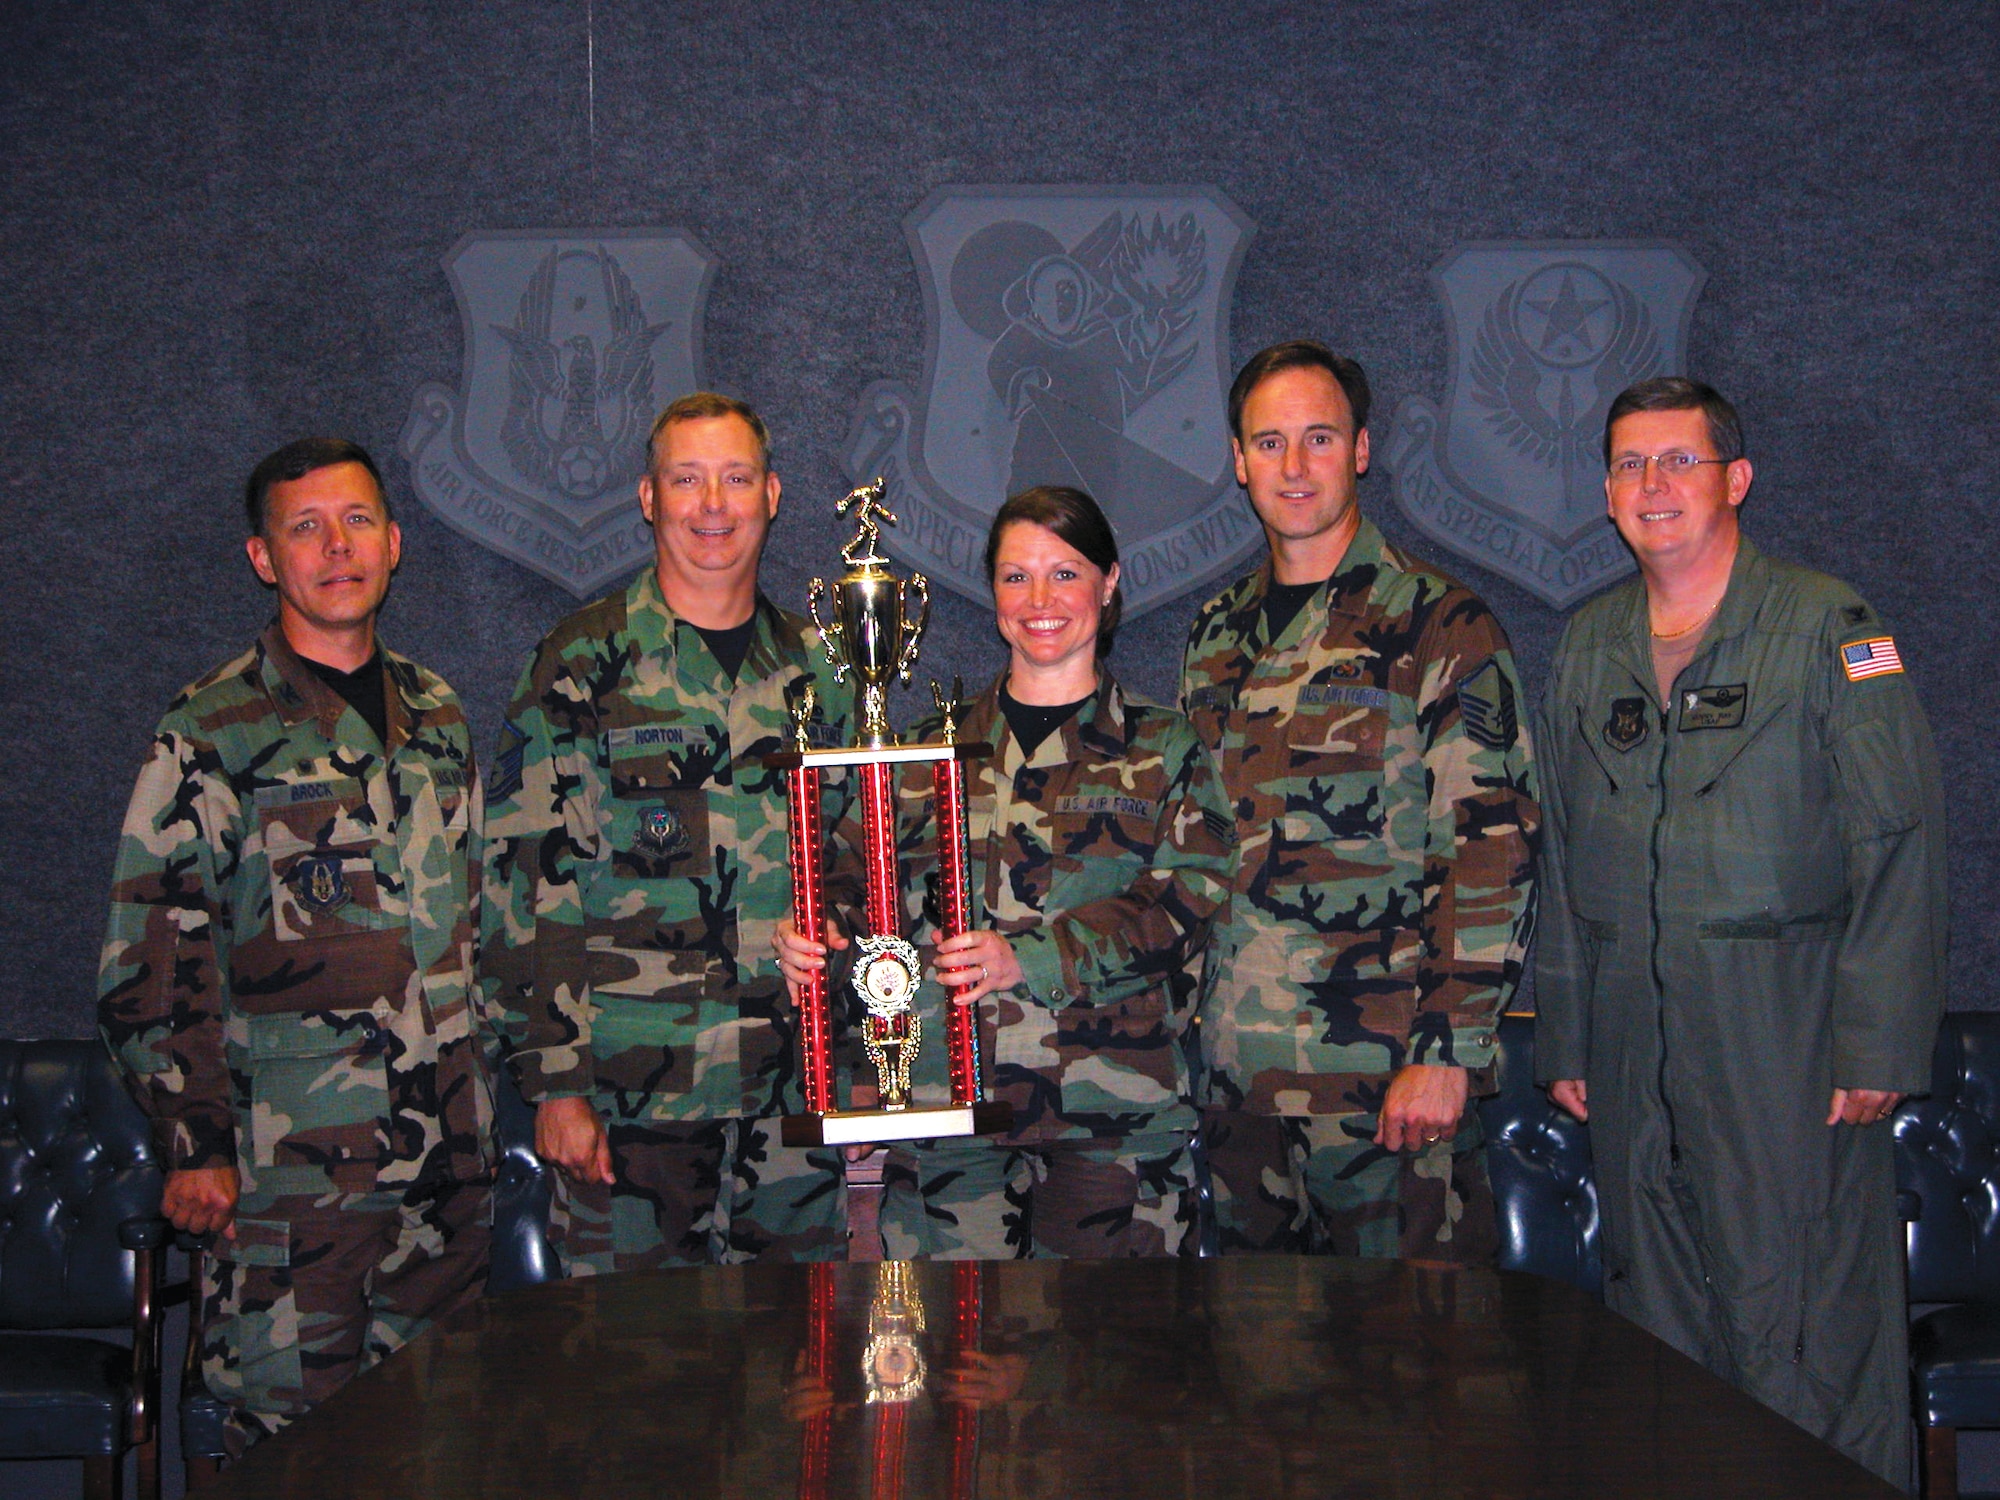 (Left to right) Col. James Brock, 919th Maintenance Group commander, Master Sgt. Jeffrey Norton, 919th Maintenance Squadron, Senior Airman Christina Bicknell,  919th Medical Squadron, Master Sgt. Steven Bicknell, 919th MXS, and Col. Kenneth Ray, wing vice commander, celebrate the 919th MXS Bowling Team?s win of the Eglin Air Force Base Bowling Championship. The two maintainers, dental assistant, and four team members beat the 96th Services Squadron May 29. (U.S. Air Force Photo\Jasmine DeNamur)